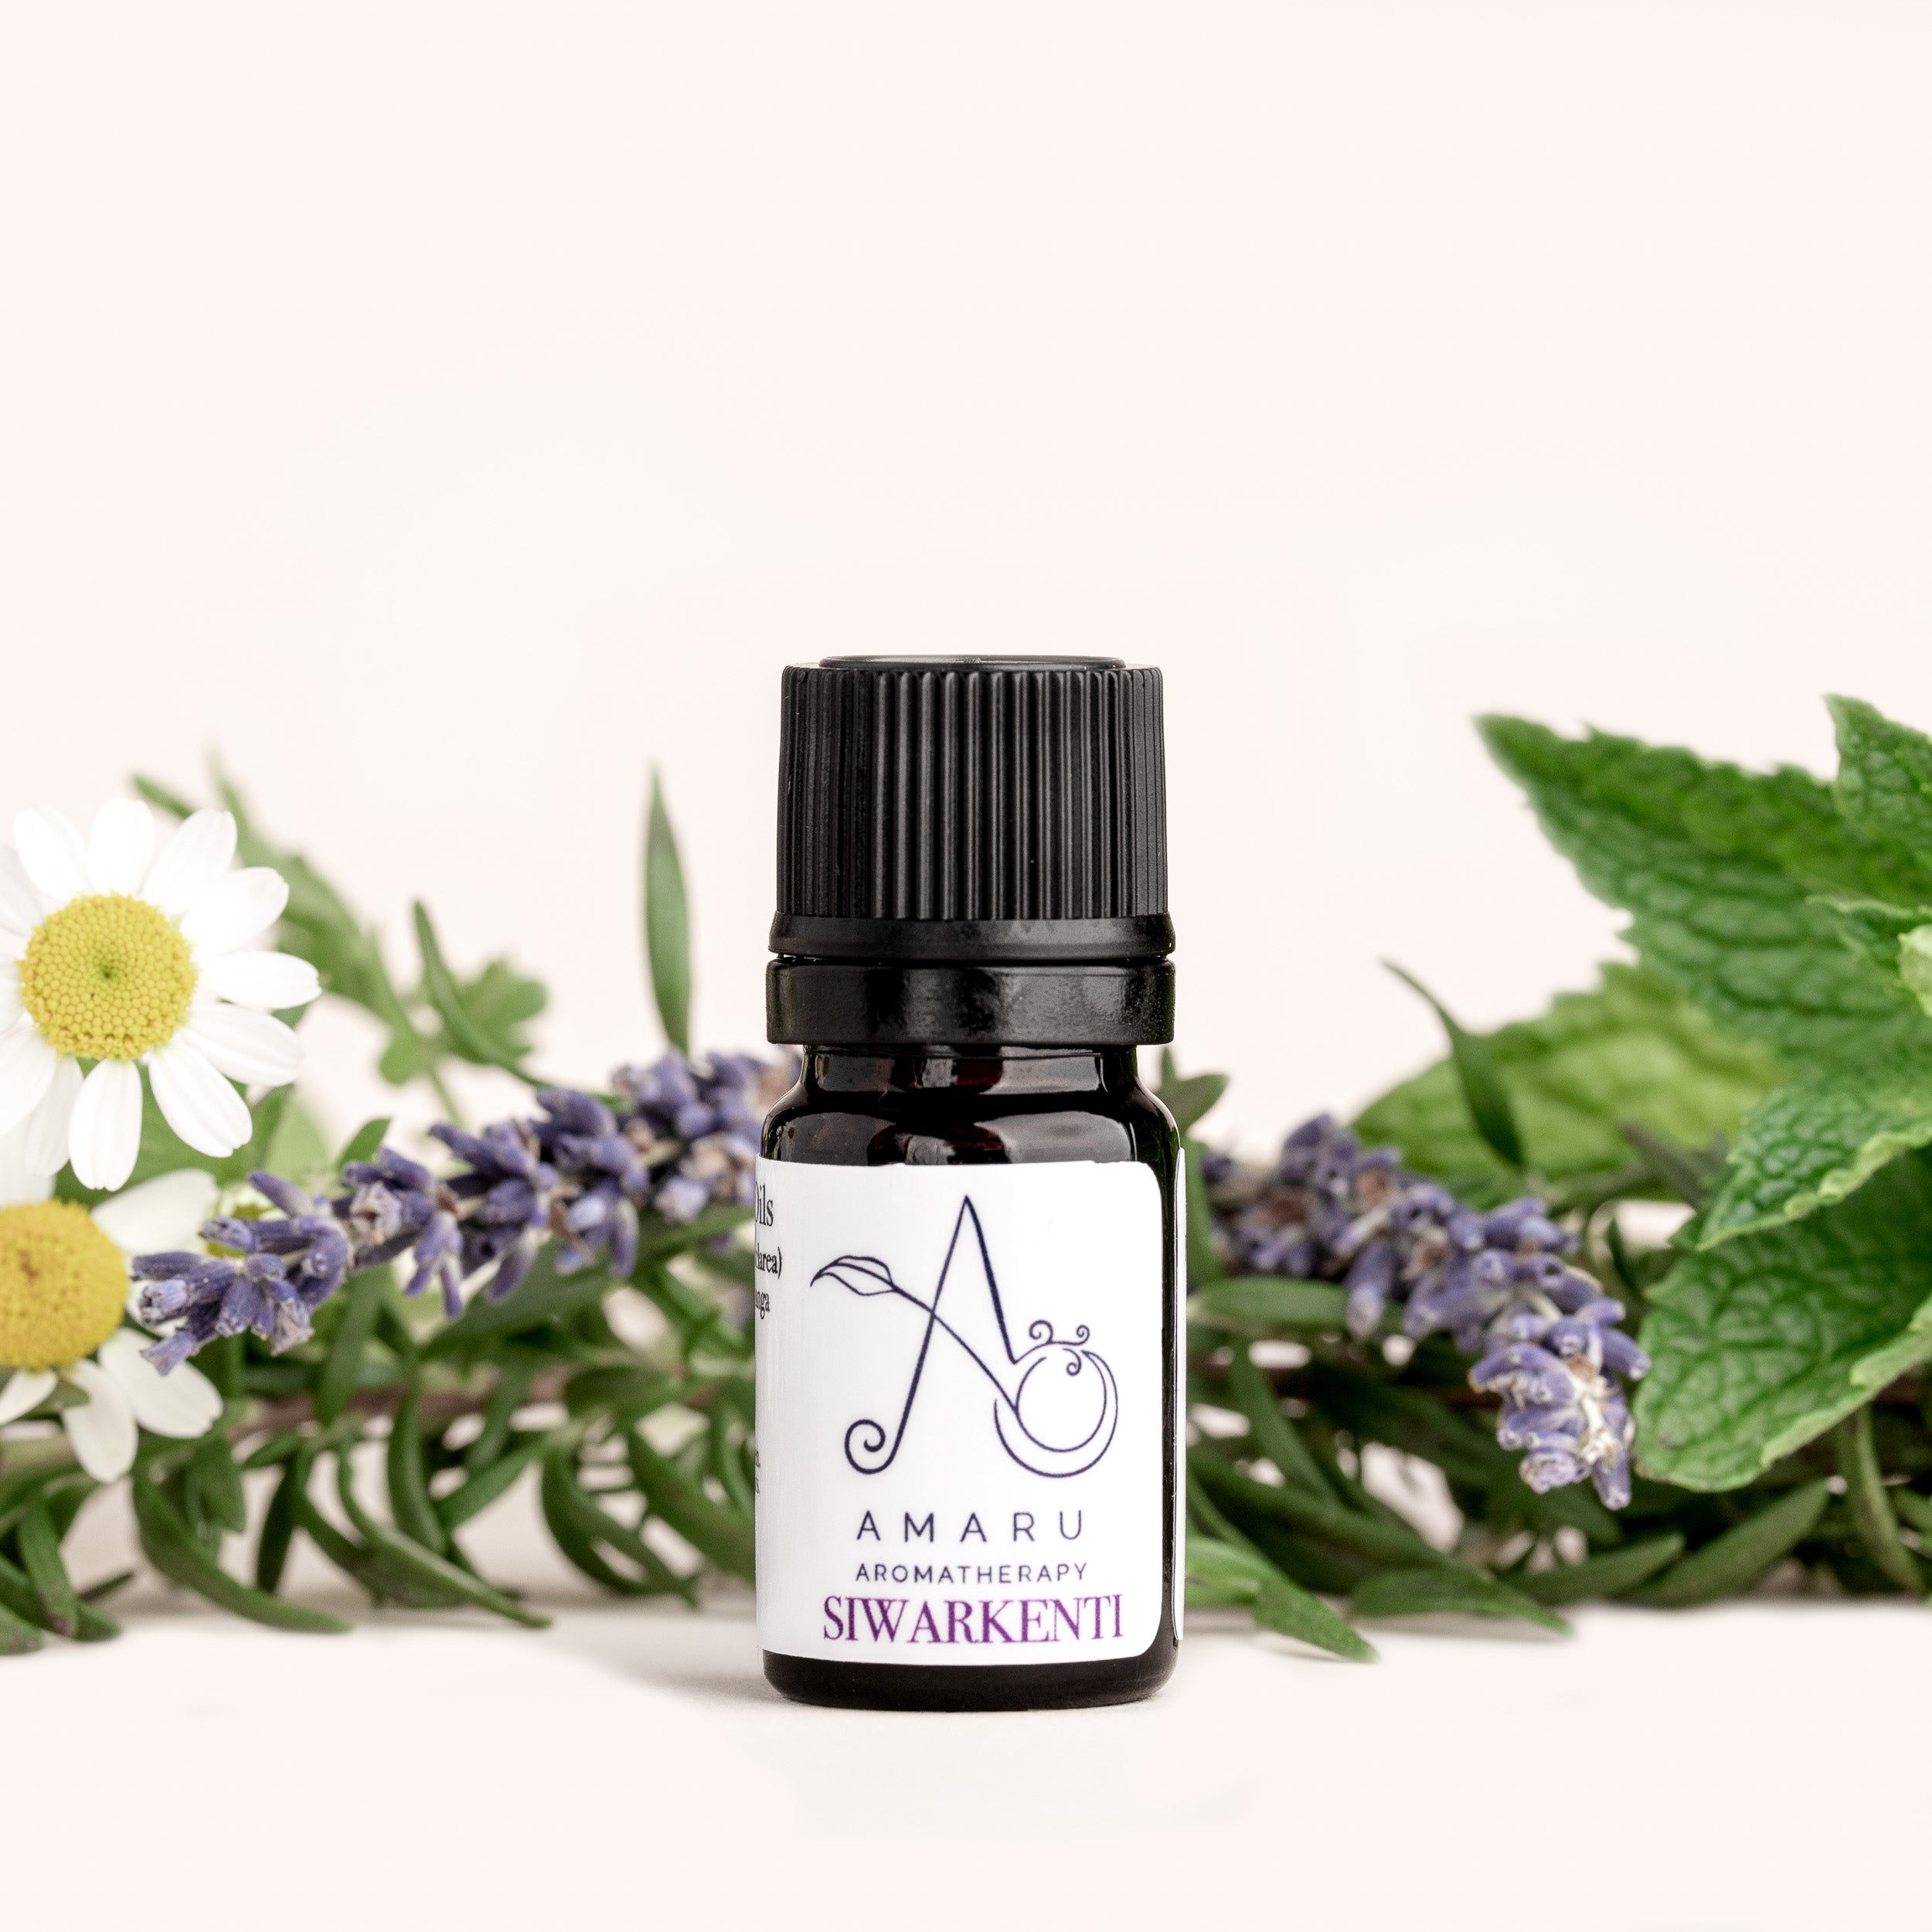 Andean Archetype Essential Oil Collection